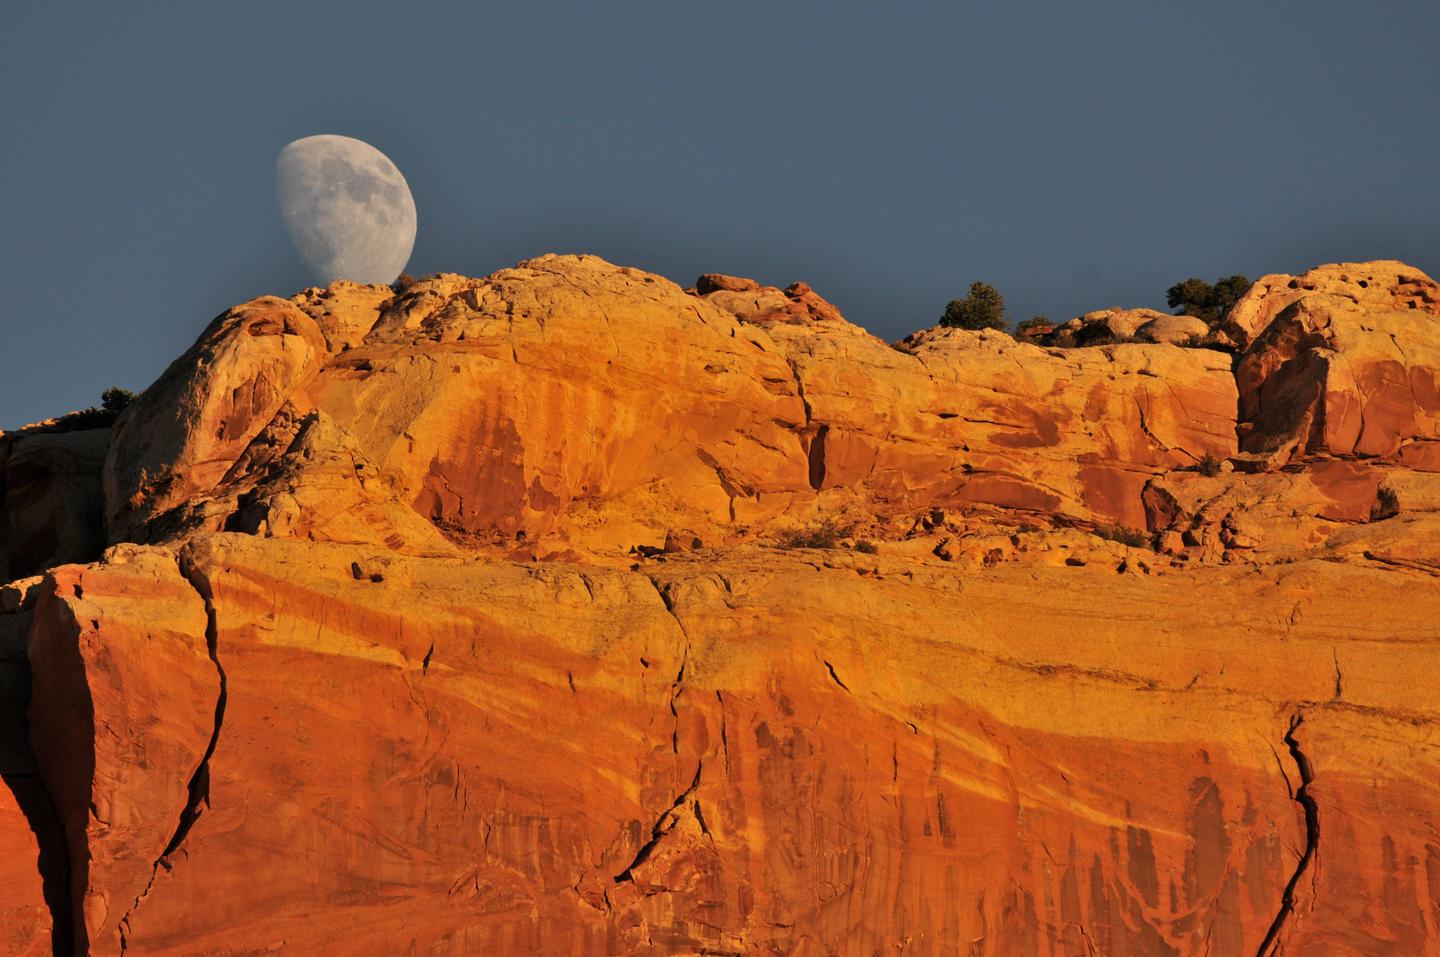 An almost full moon comes over a orange-red colored rock formation.Moonrise over Capital Reef.  Photo taken from Fruita Campground